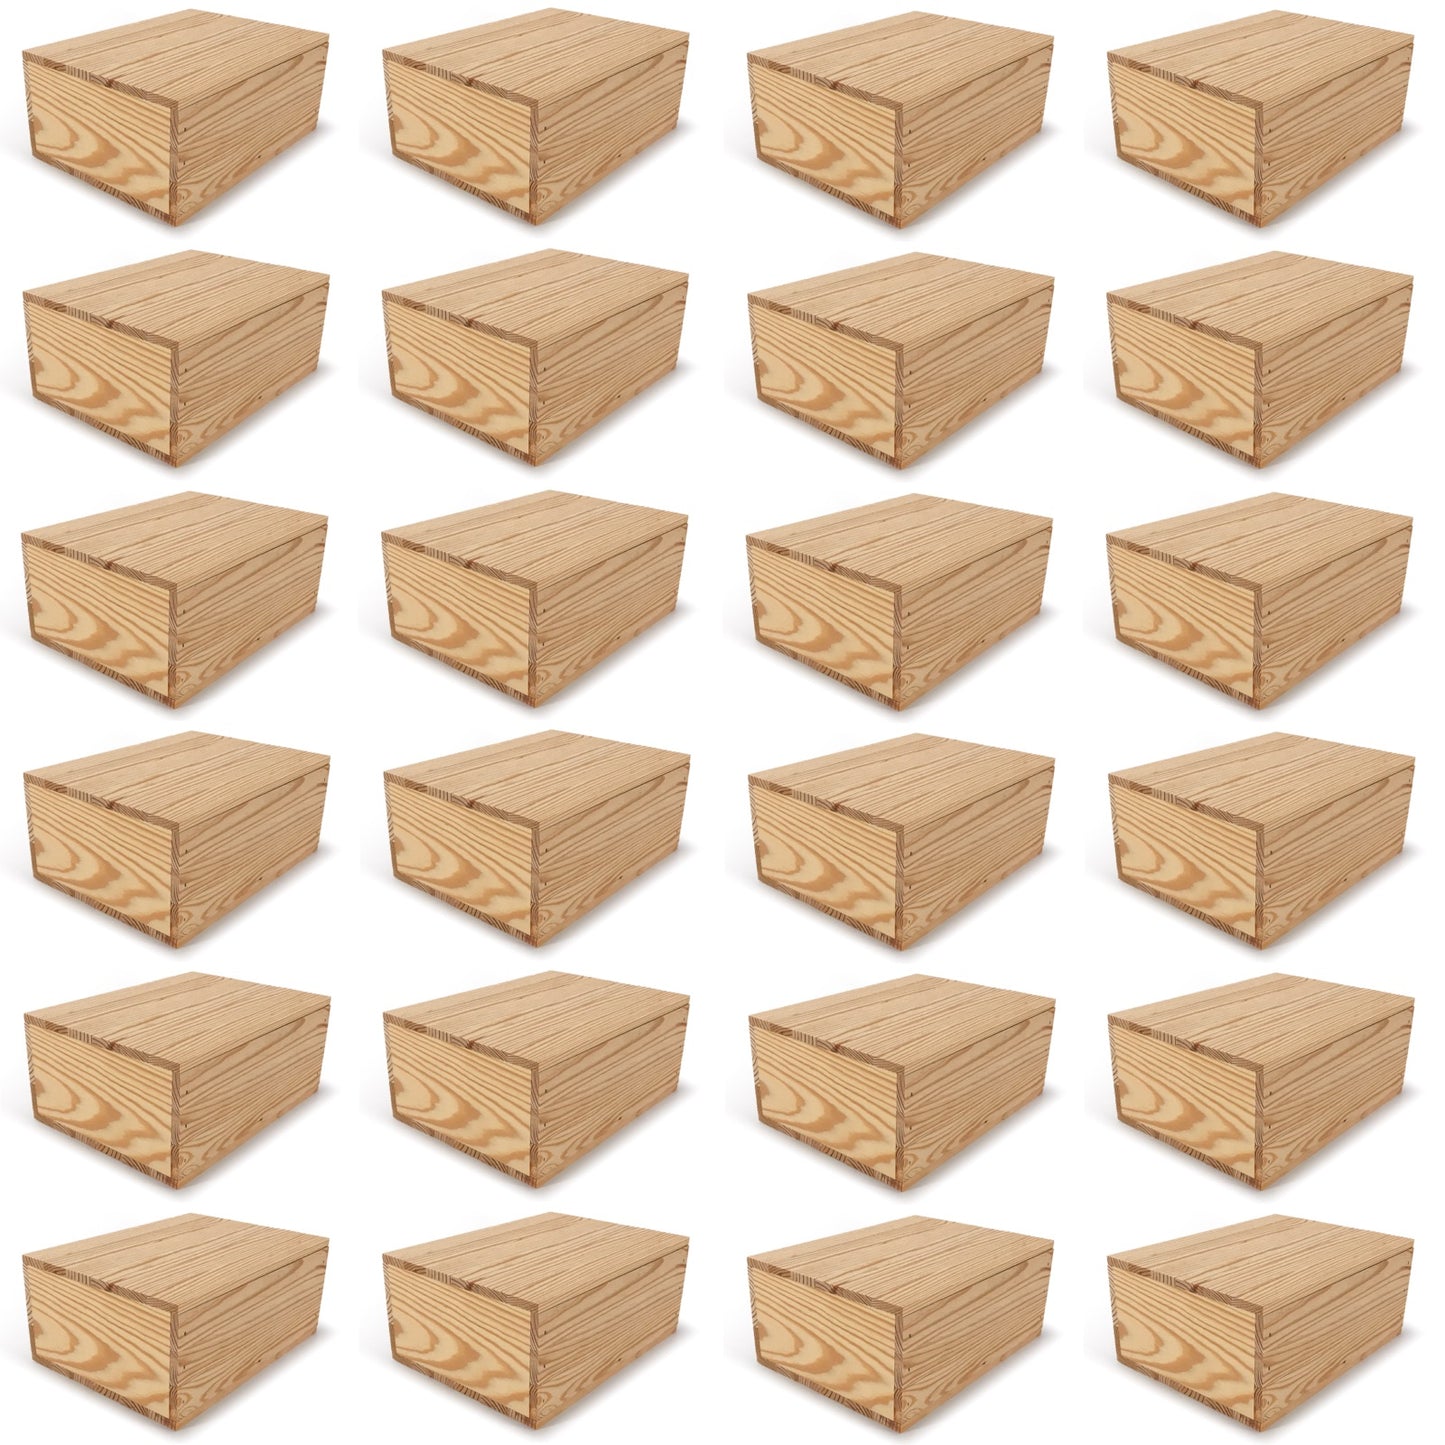 24 Small wooden crates with lid 10x8x4.25